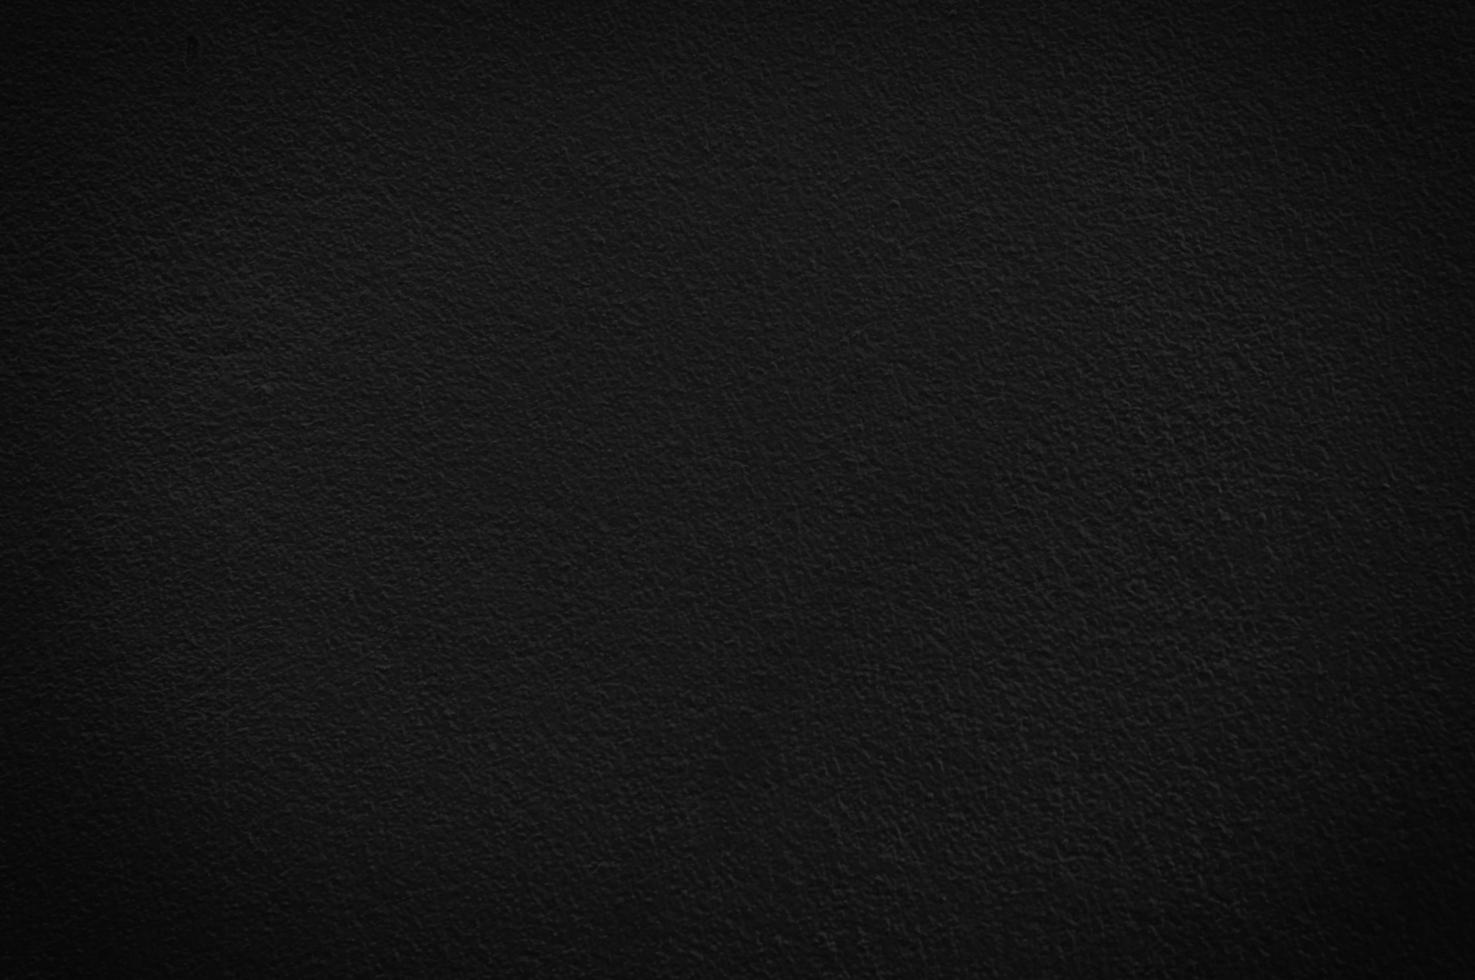 Dark rough concrete wall texture for background for design or work photo